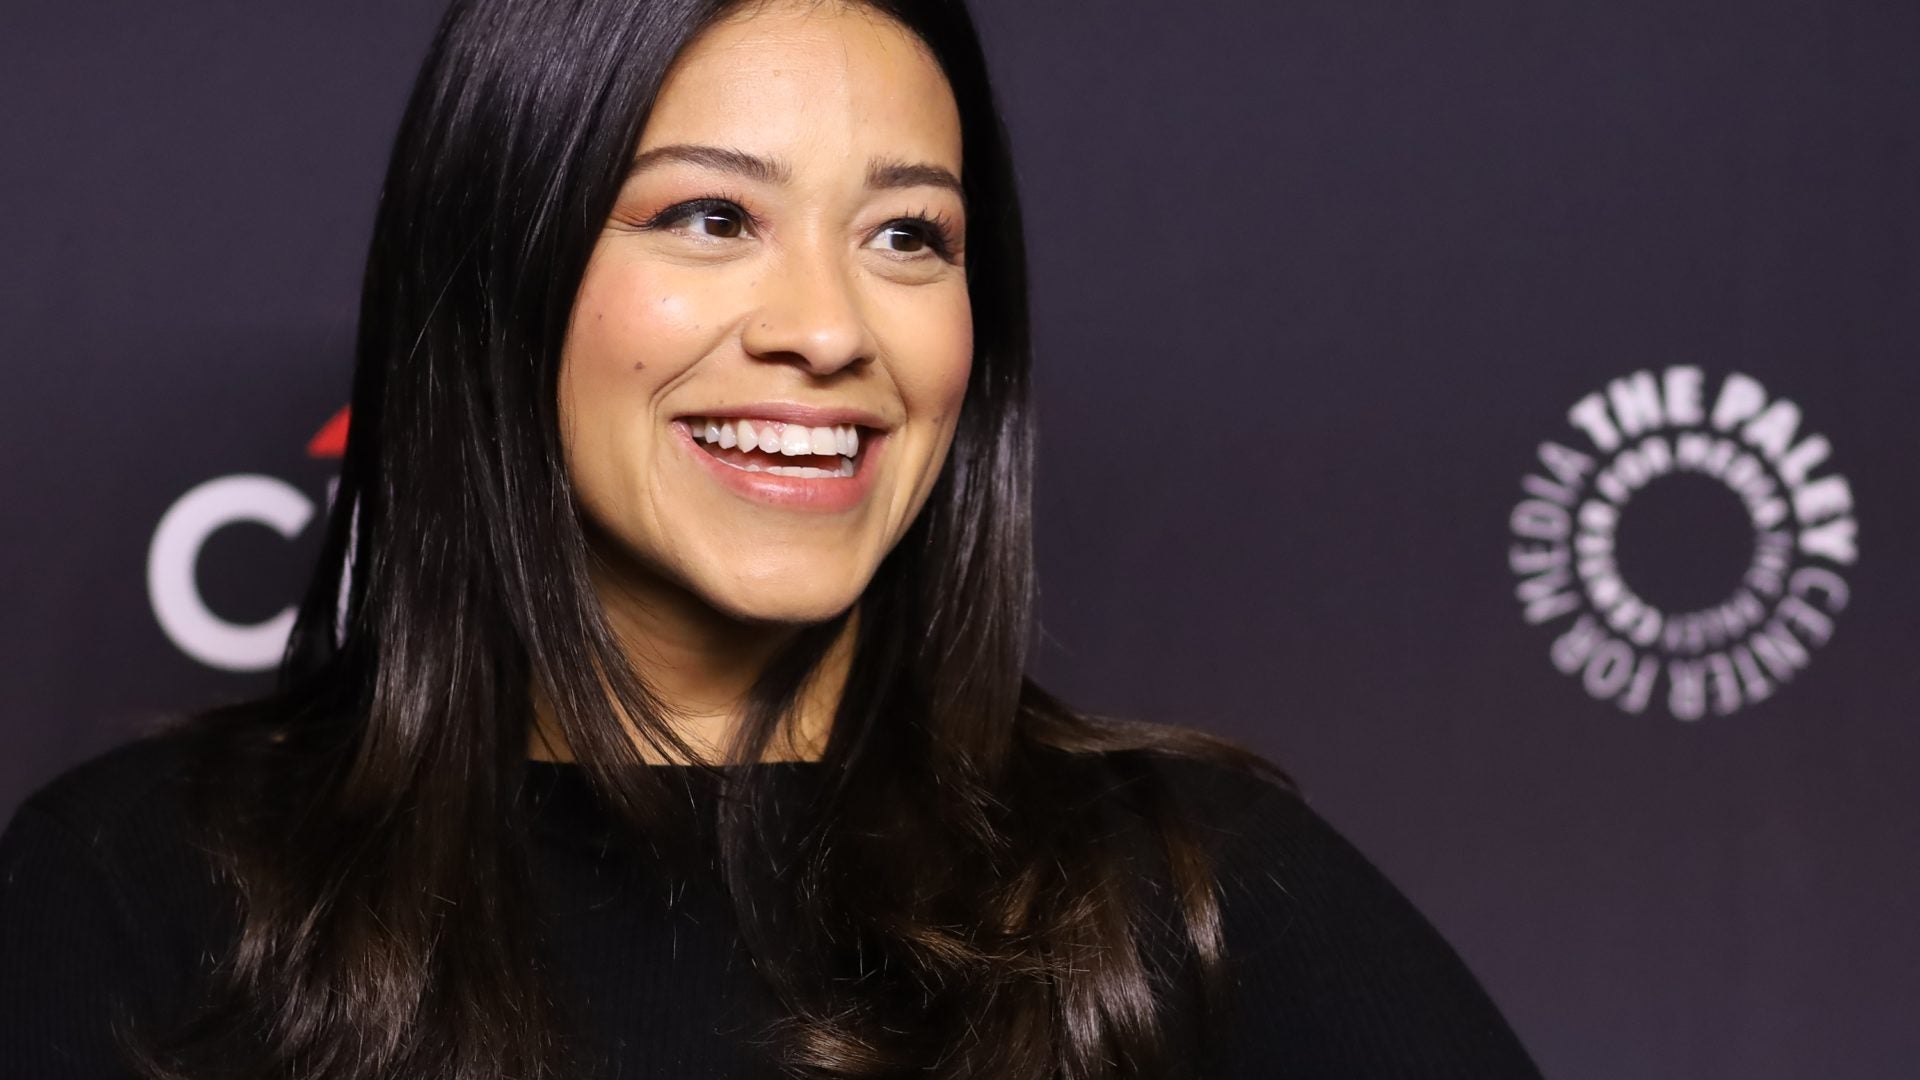 Gina Rodriguez Apologizes For Using N-Word: 'I Have Some Serious Learning' To Do 